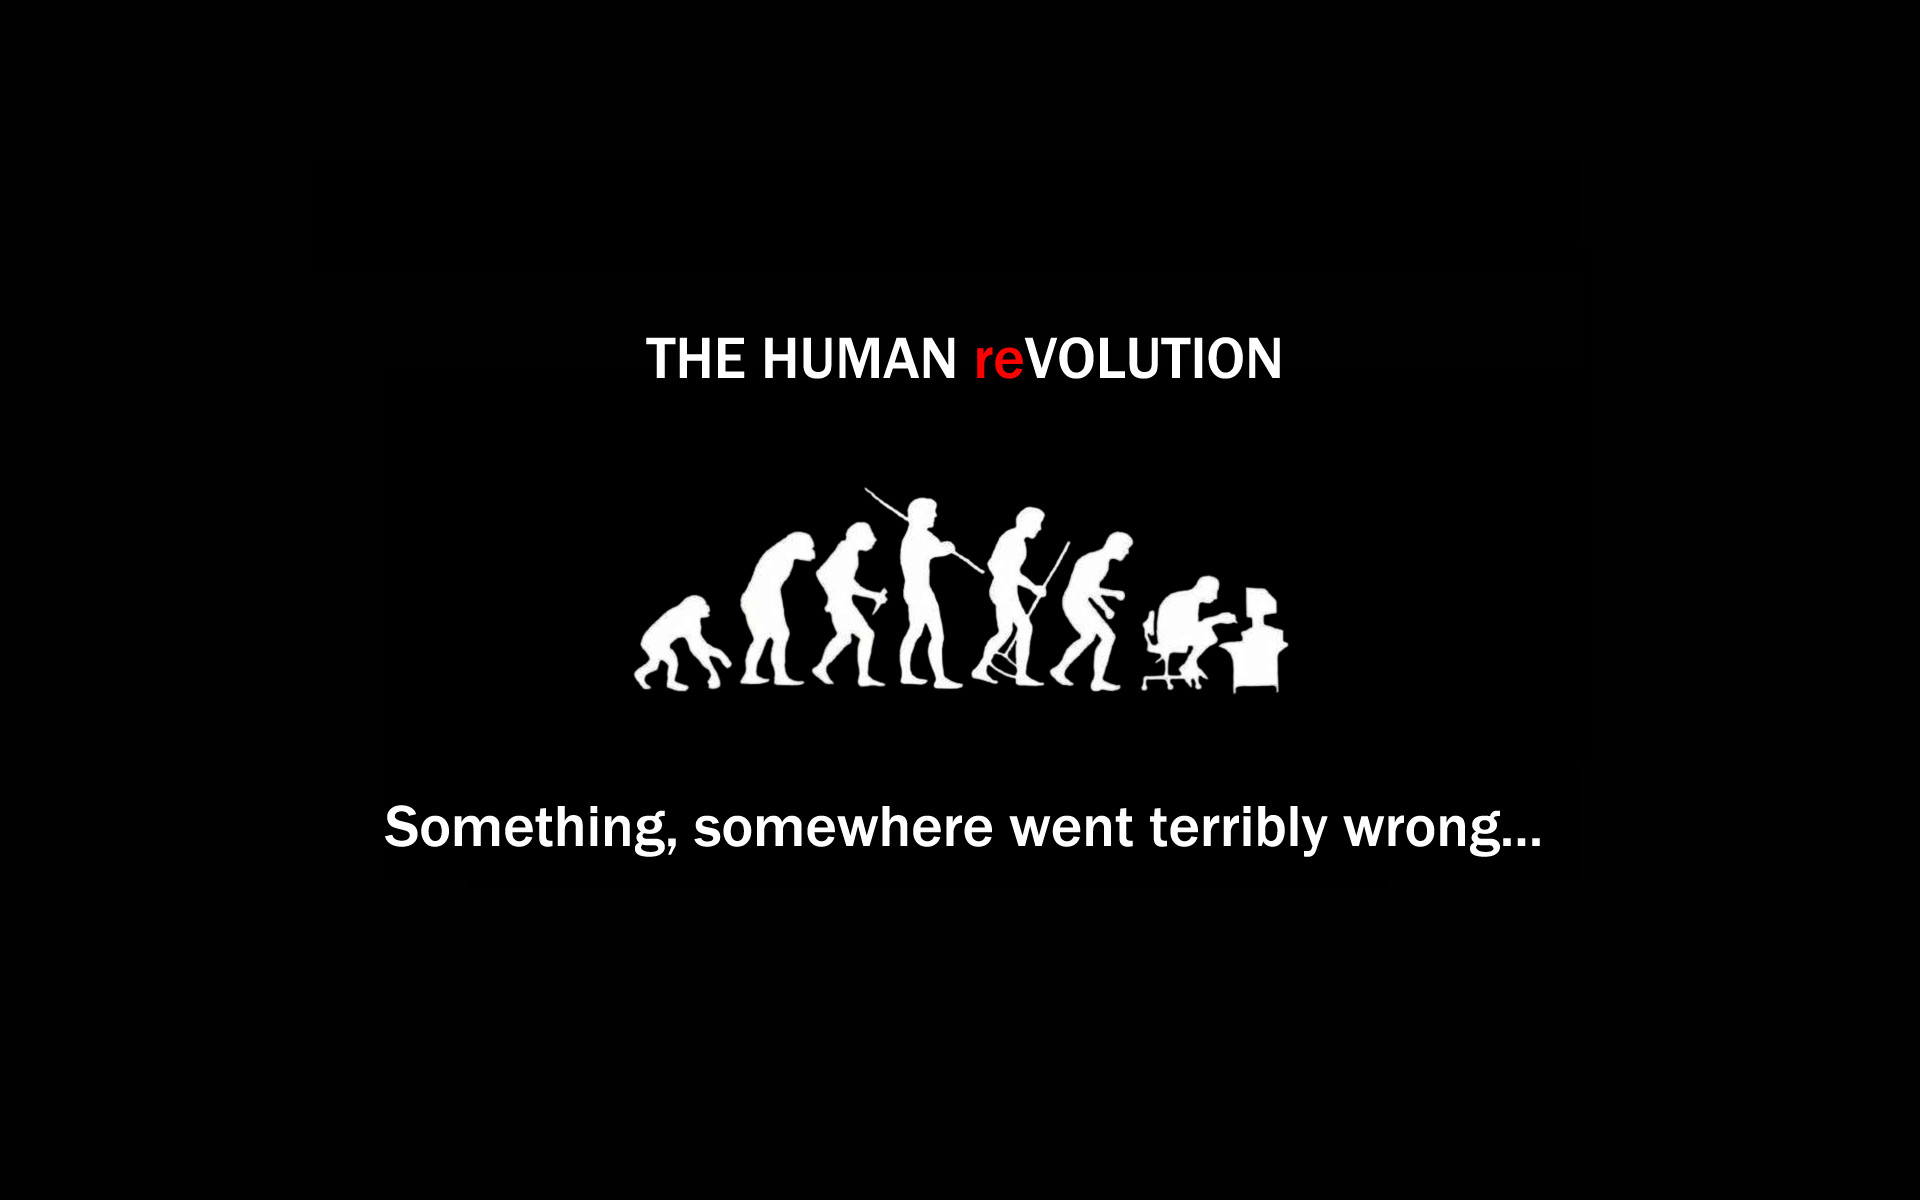 Evolution theory says that humans evolved from primates over long period of  time. Many believe